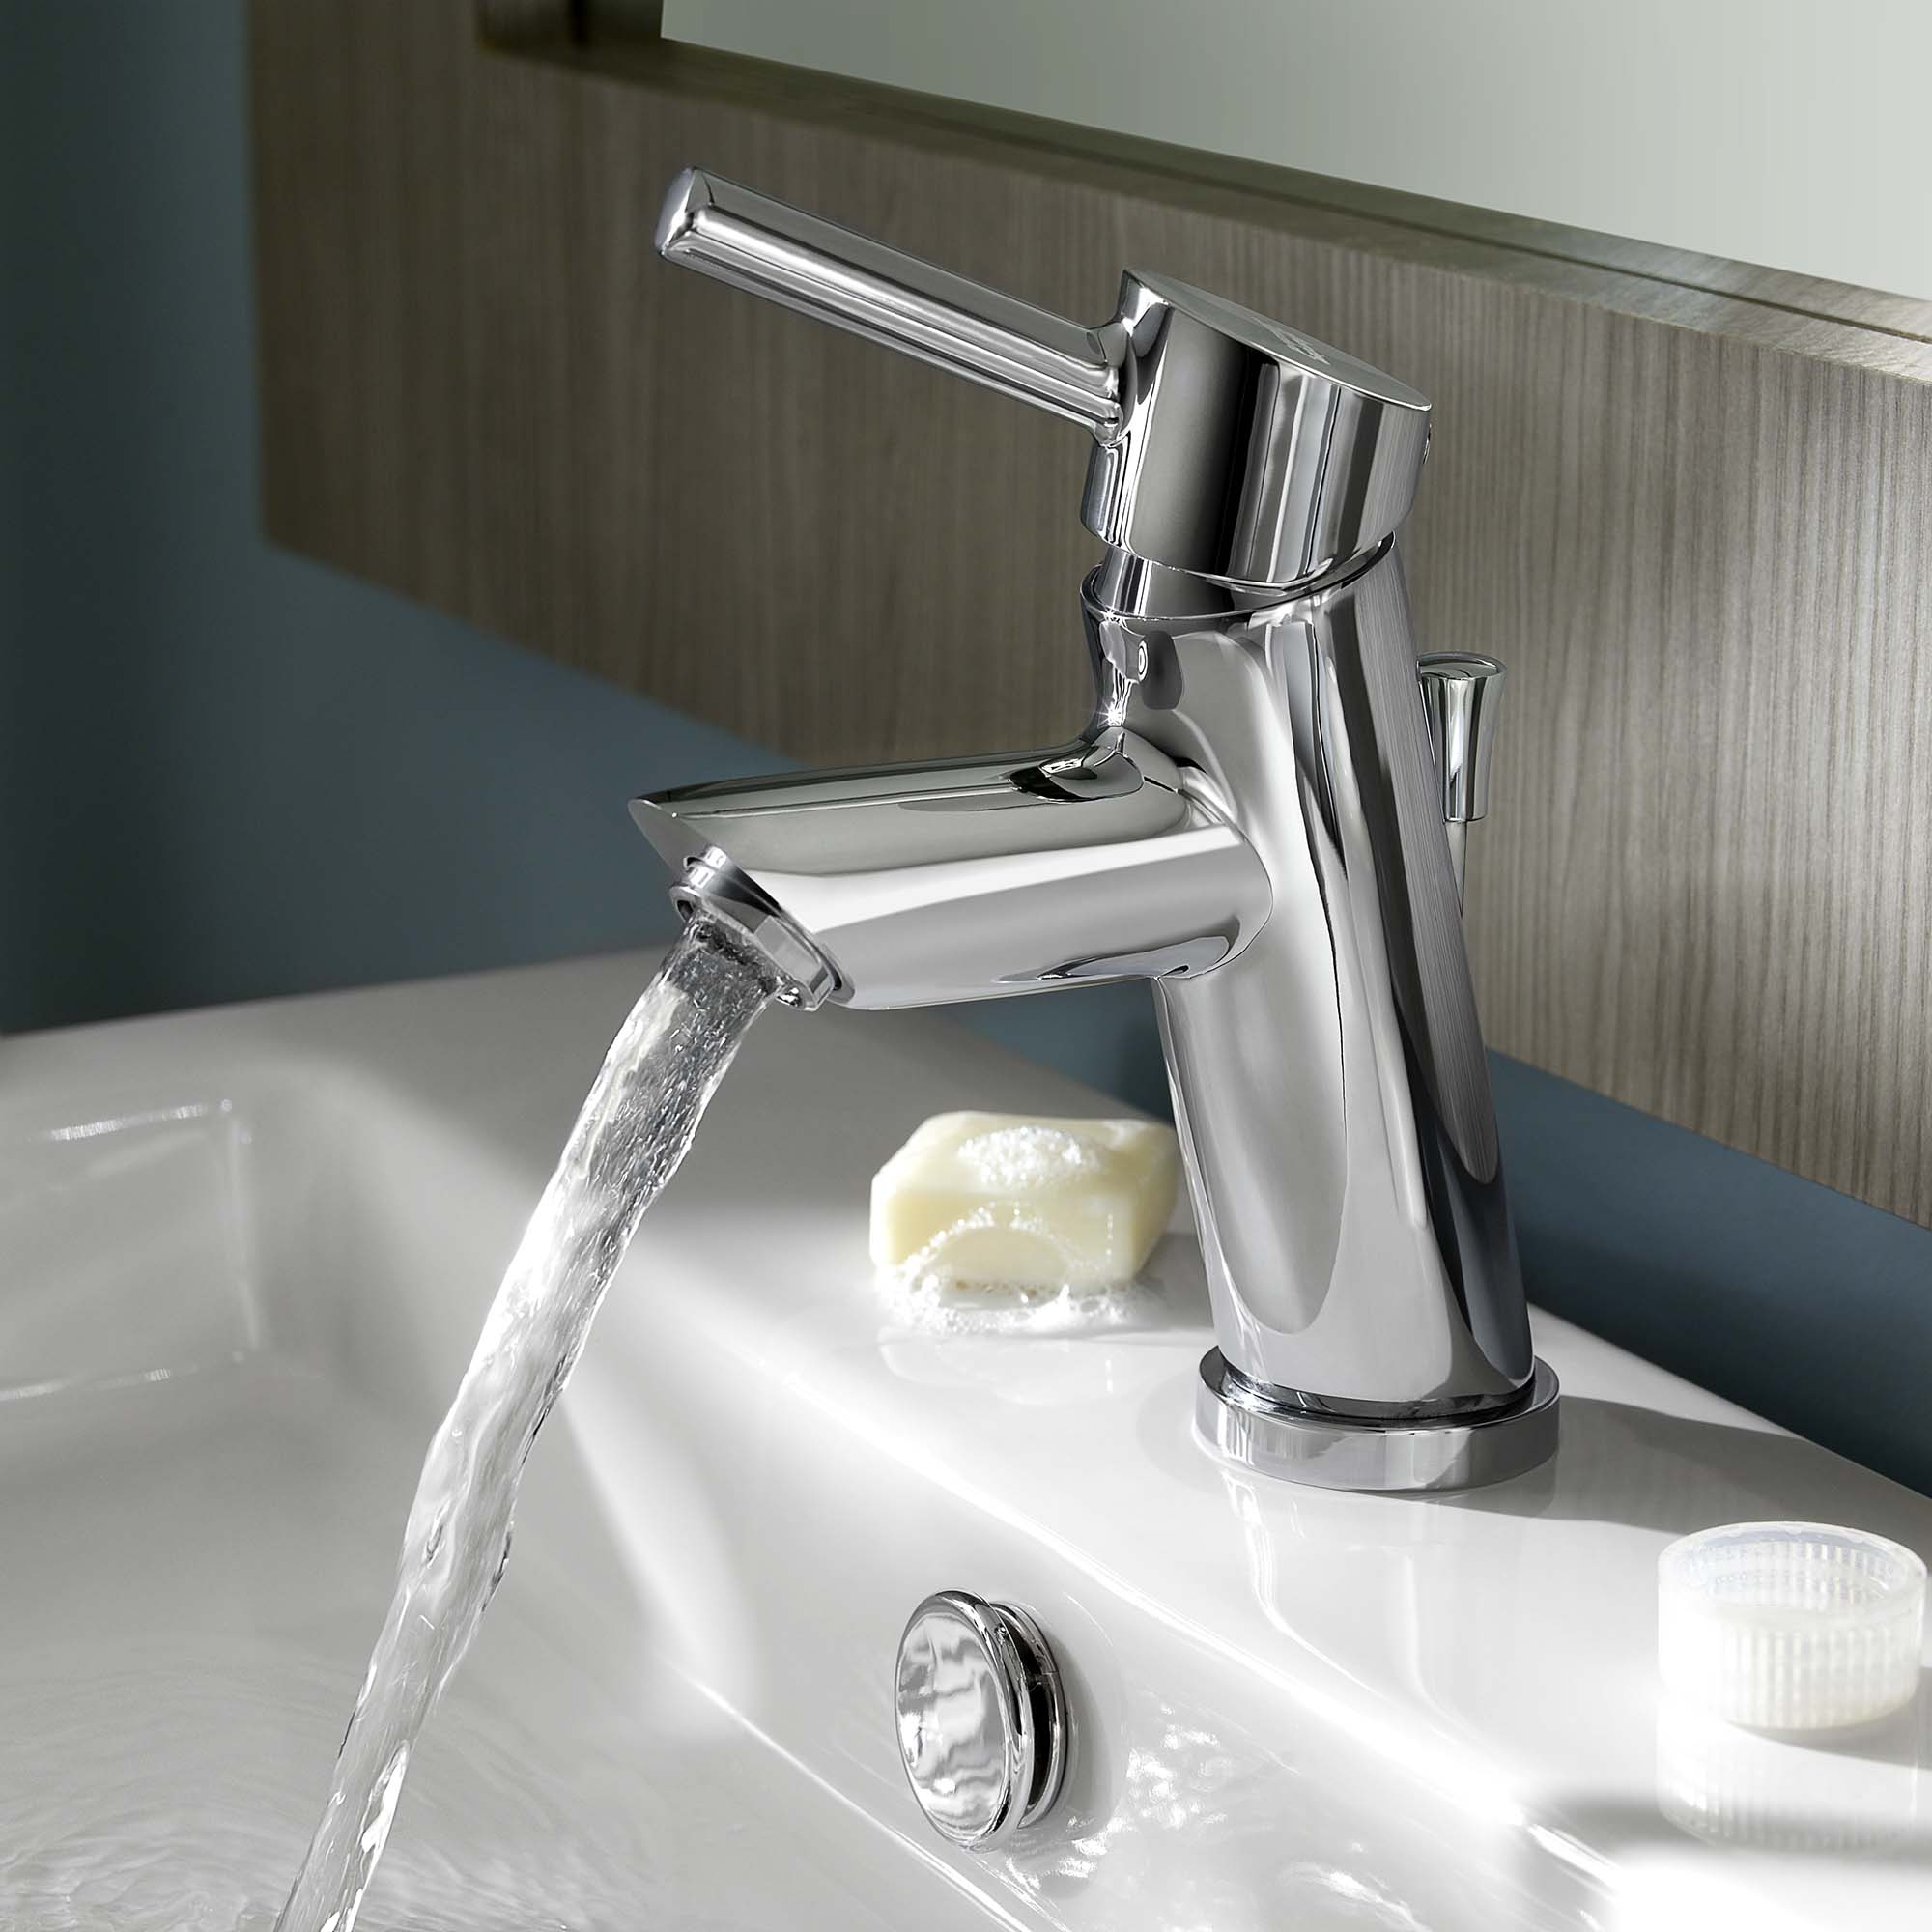 Serin® Single Hole Single-Handle Bathroom Faucet 1.2 gpm/4.5 L/min With Lever Handle